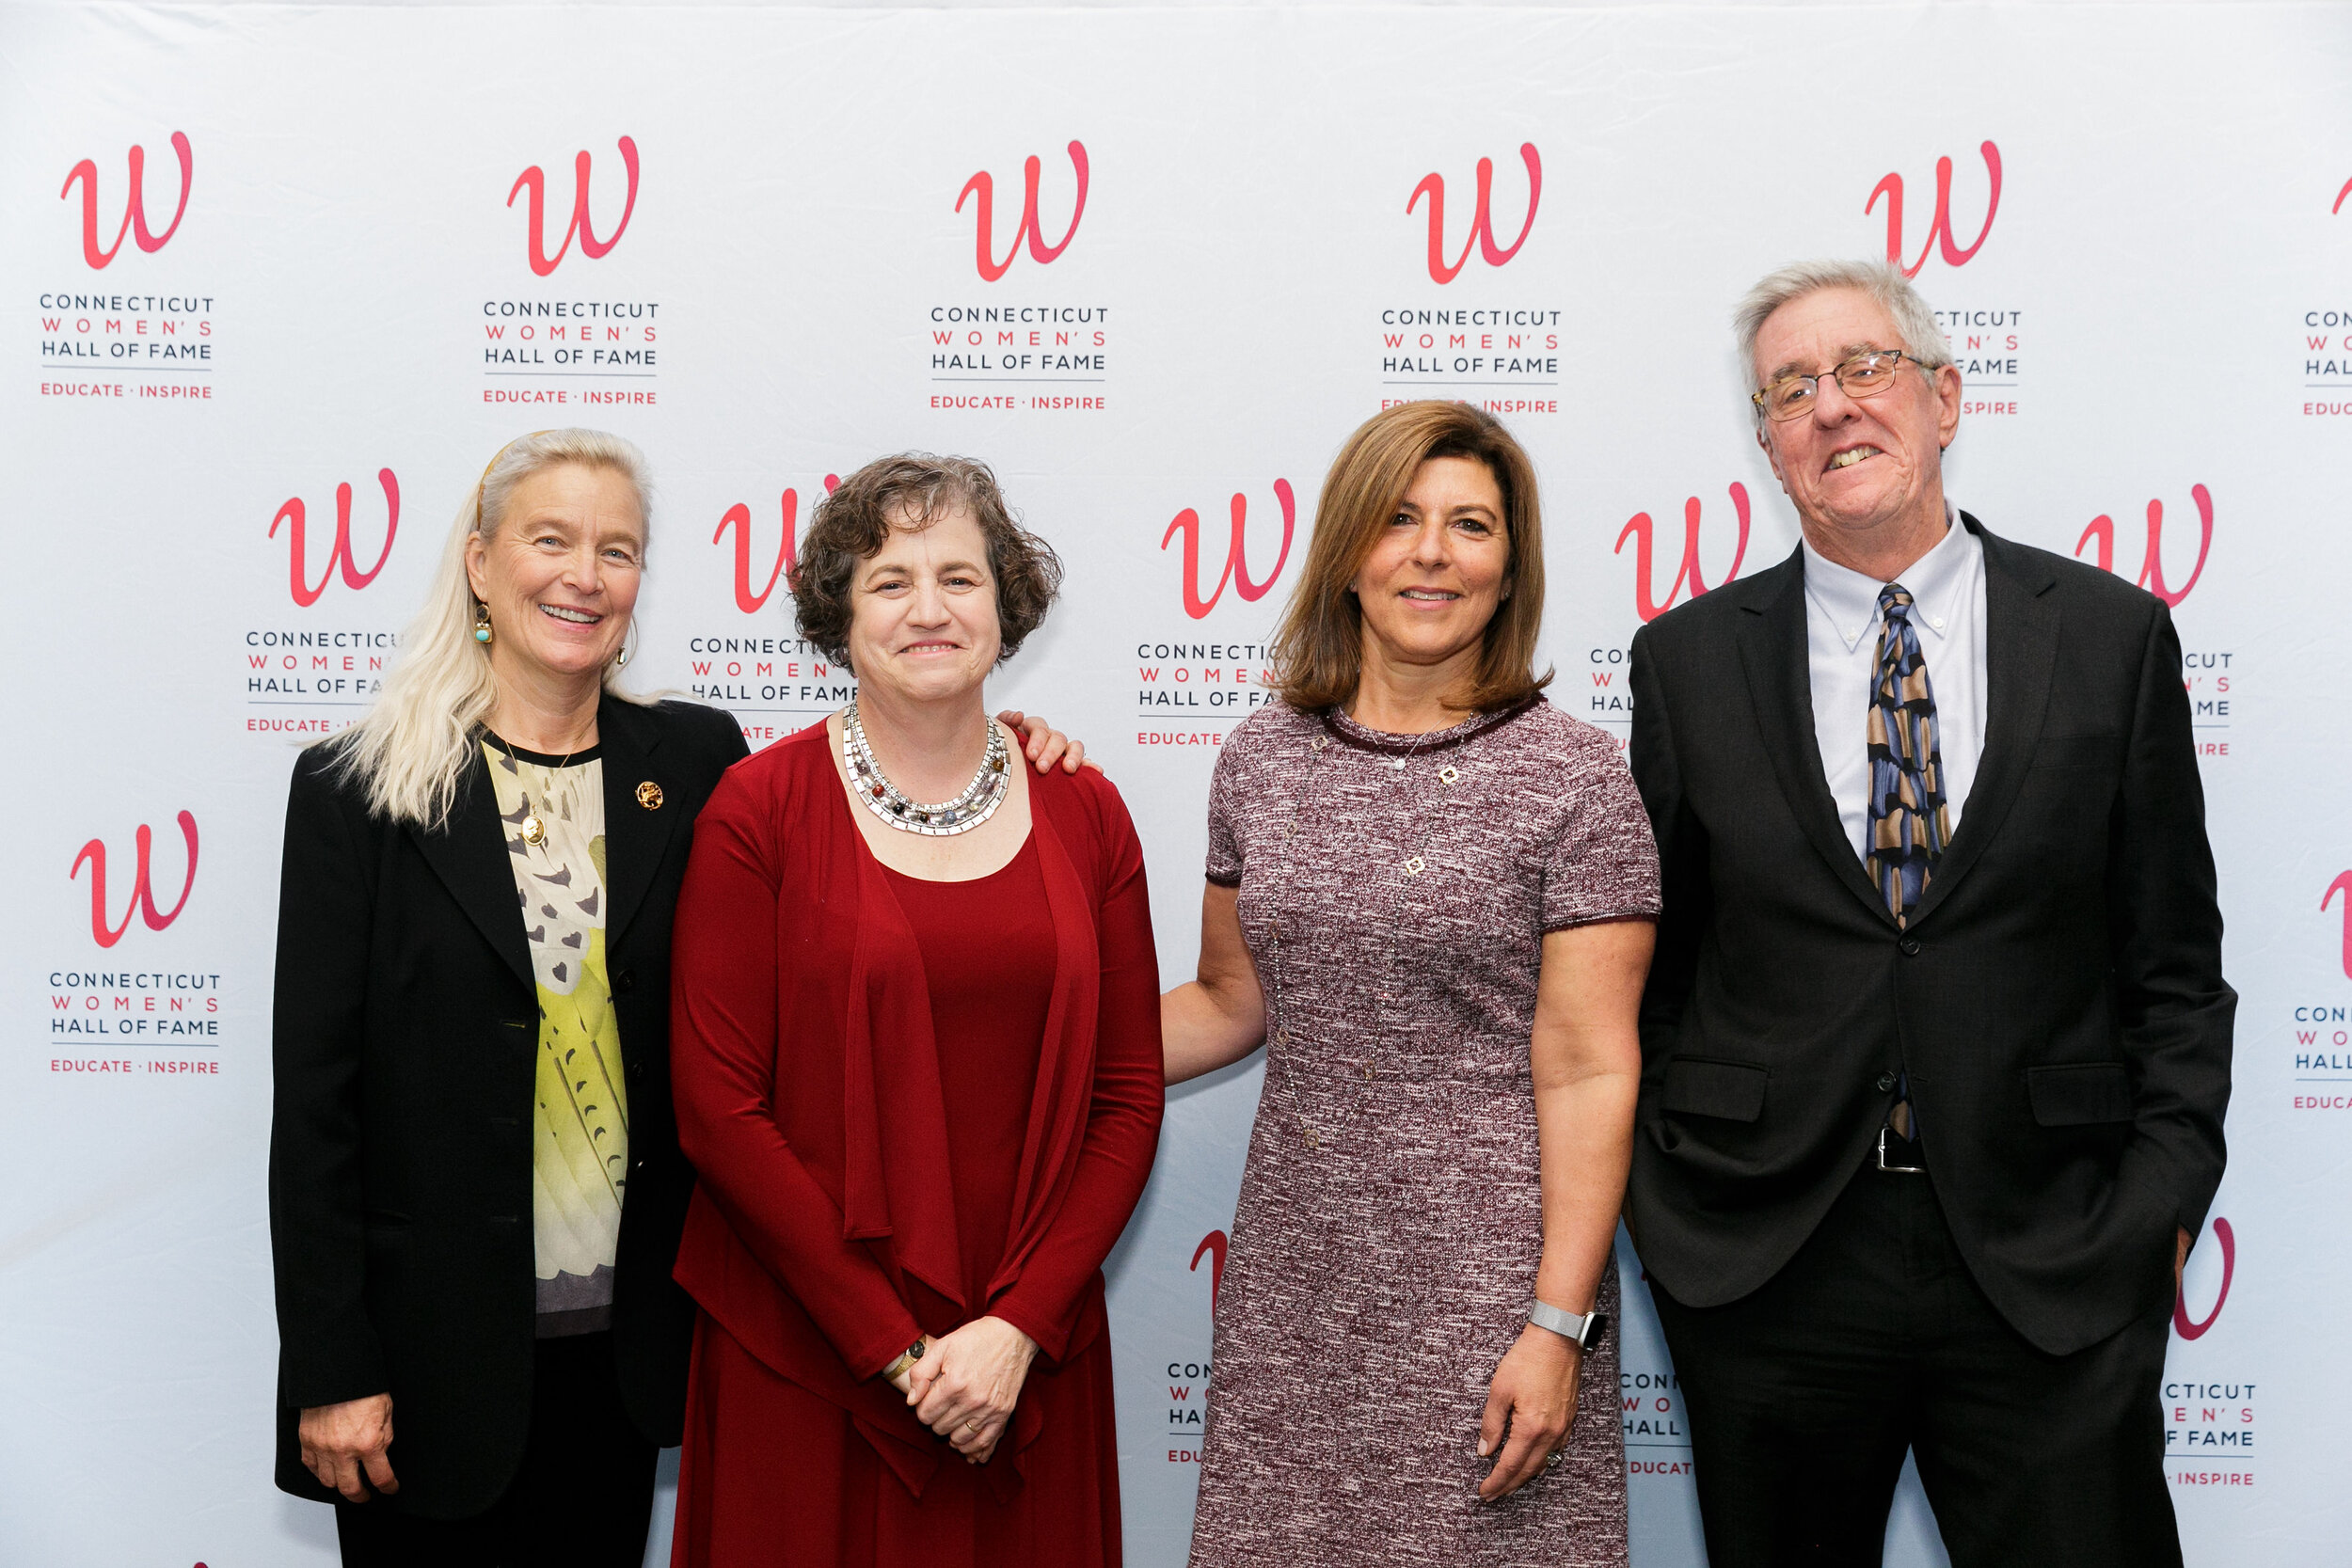   CWHF Board Chair, Sandra Vigliotti Senich with the 2019 Inductees  